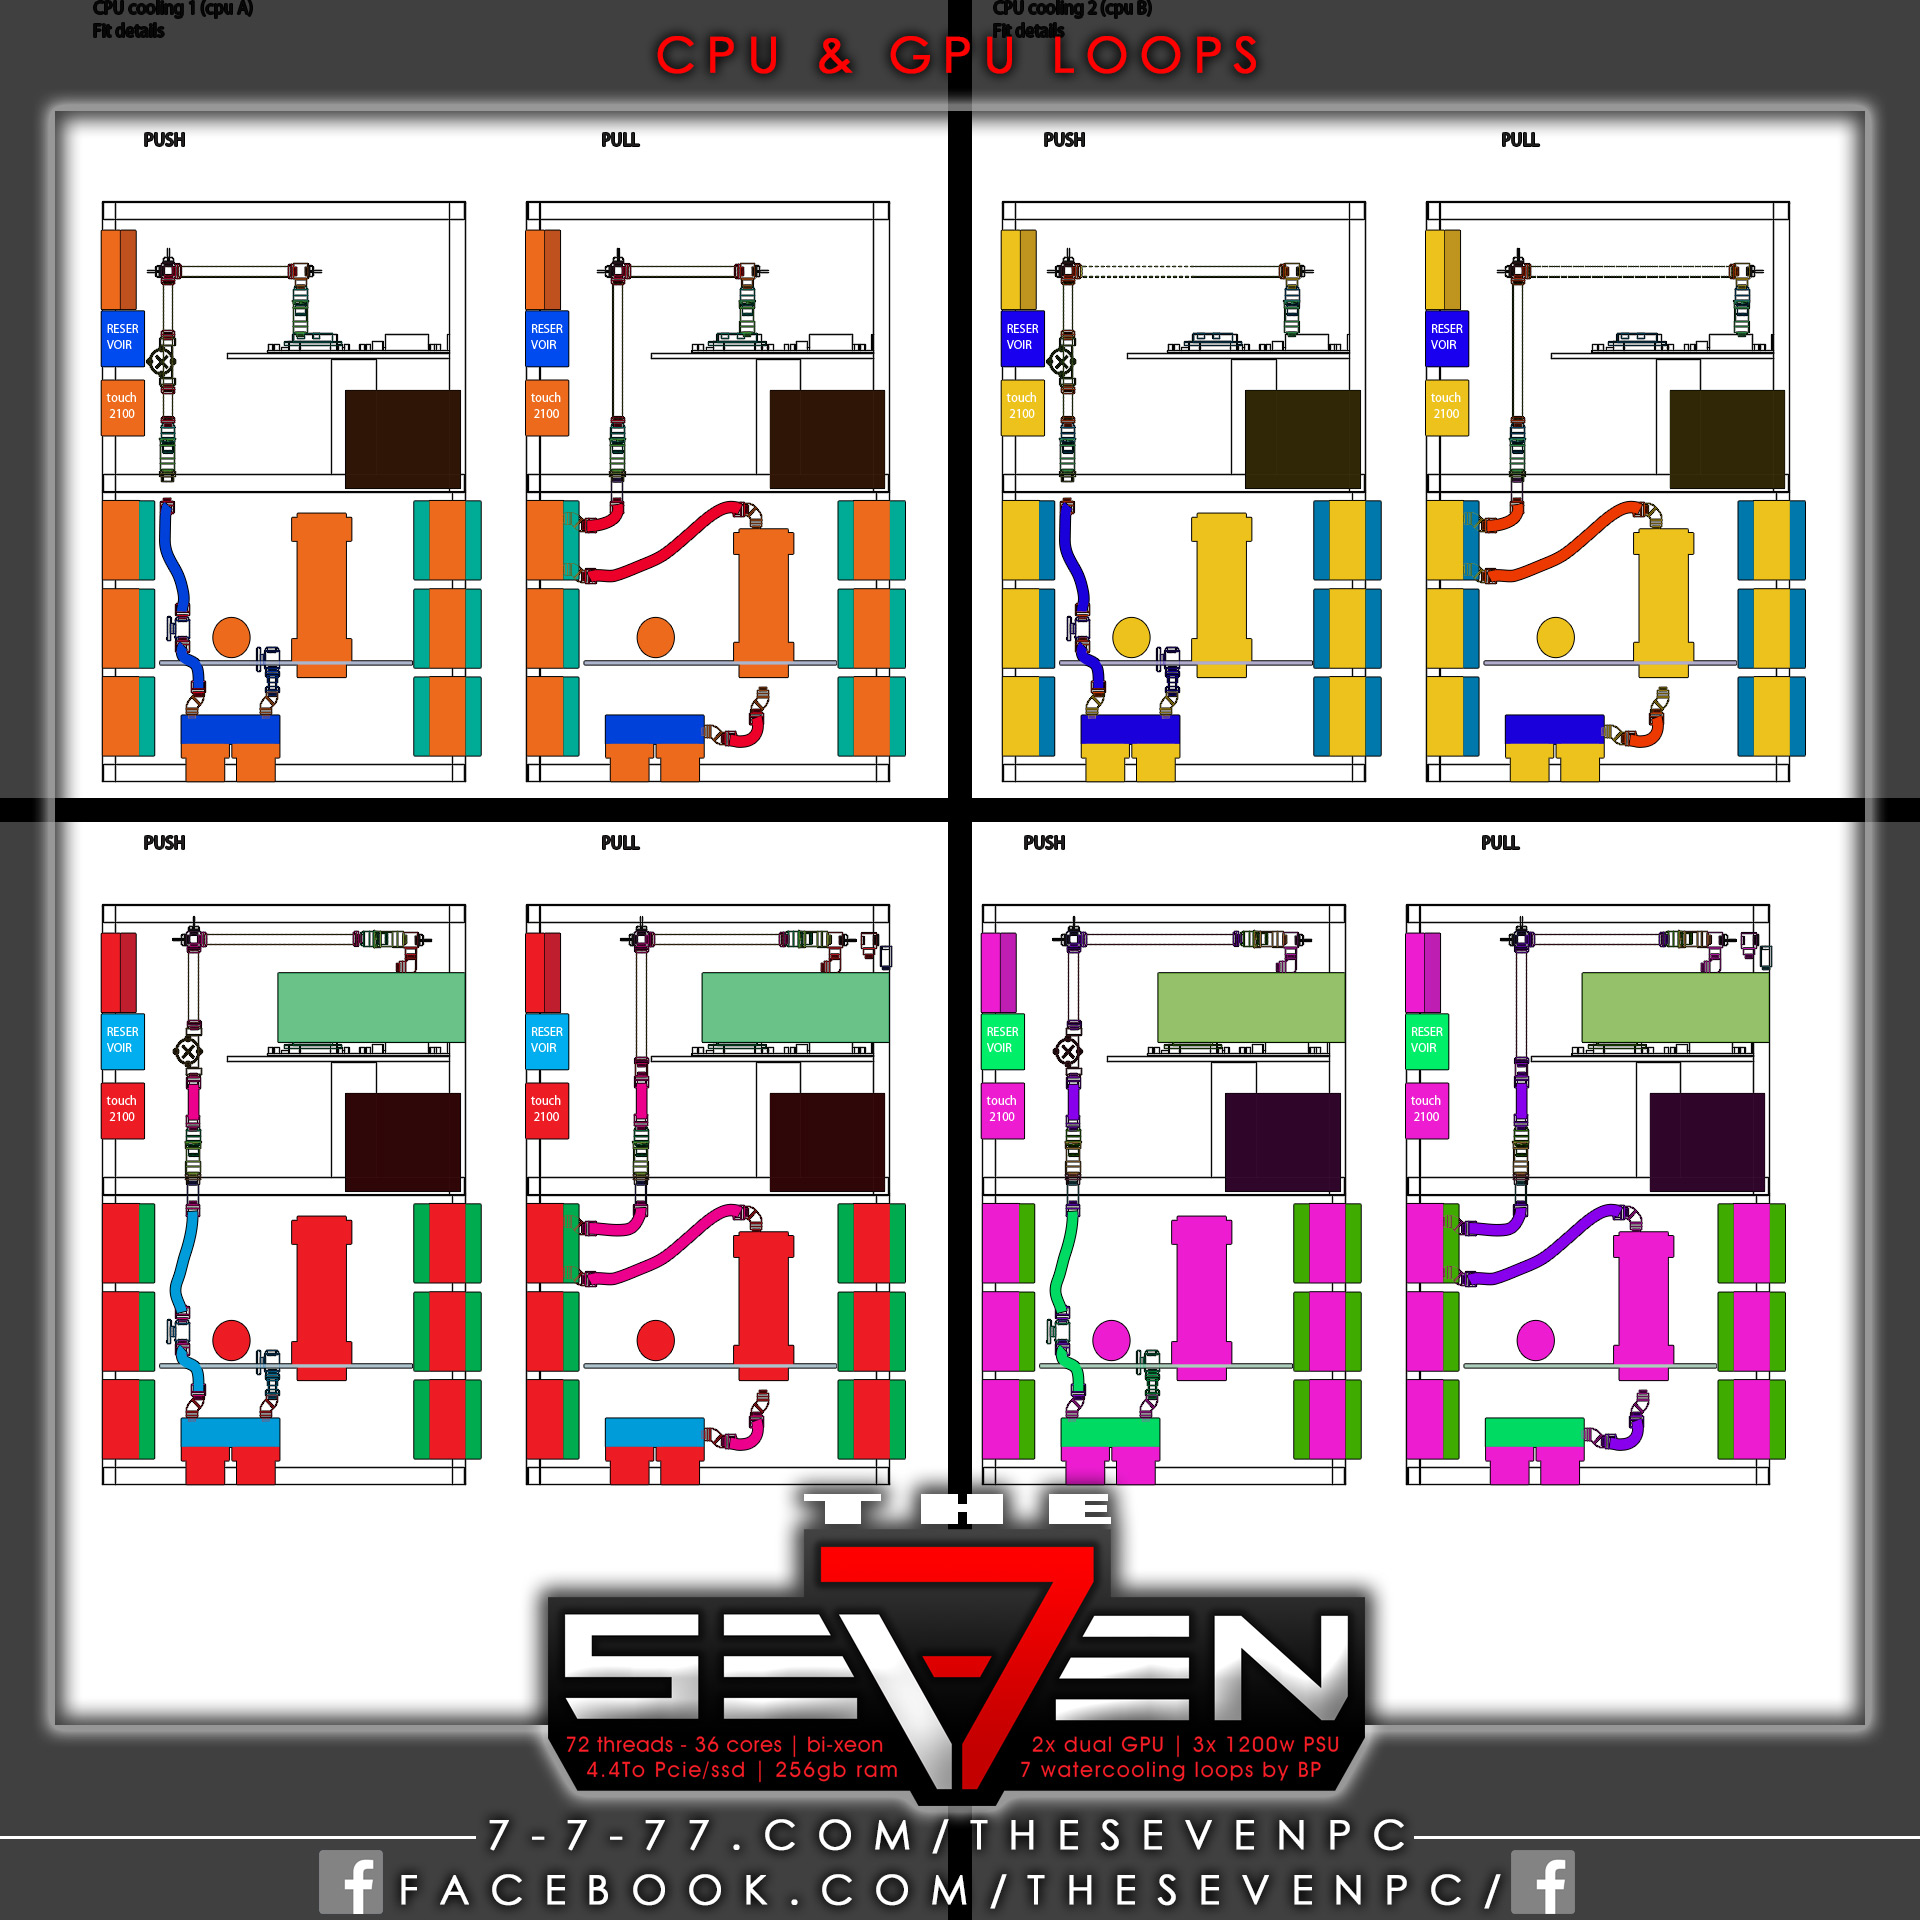 http://7-7-77.com/thesevenpc/pic/the-seven-pc-watercooling-map-02.jpg